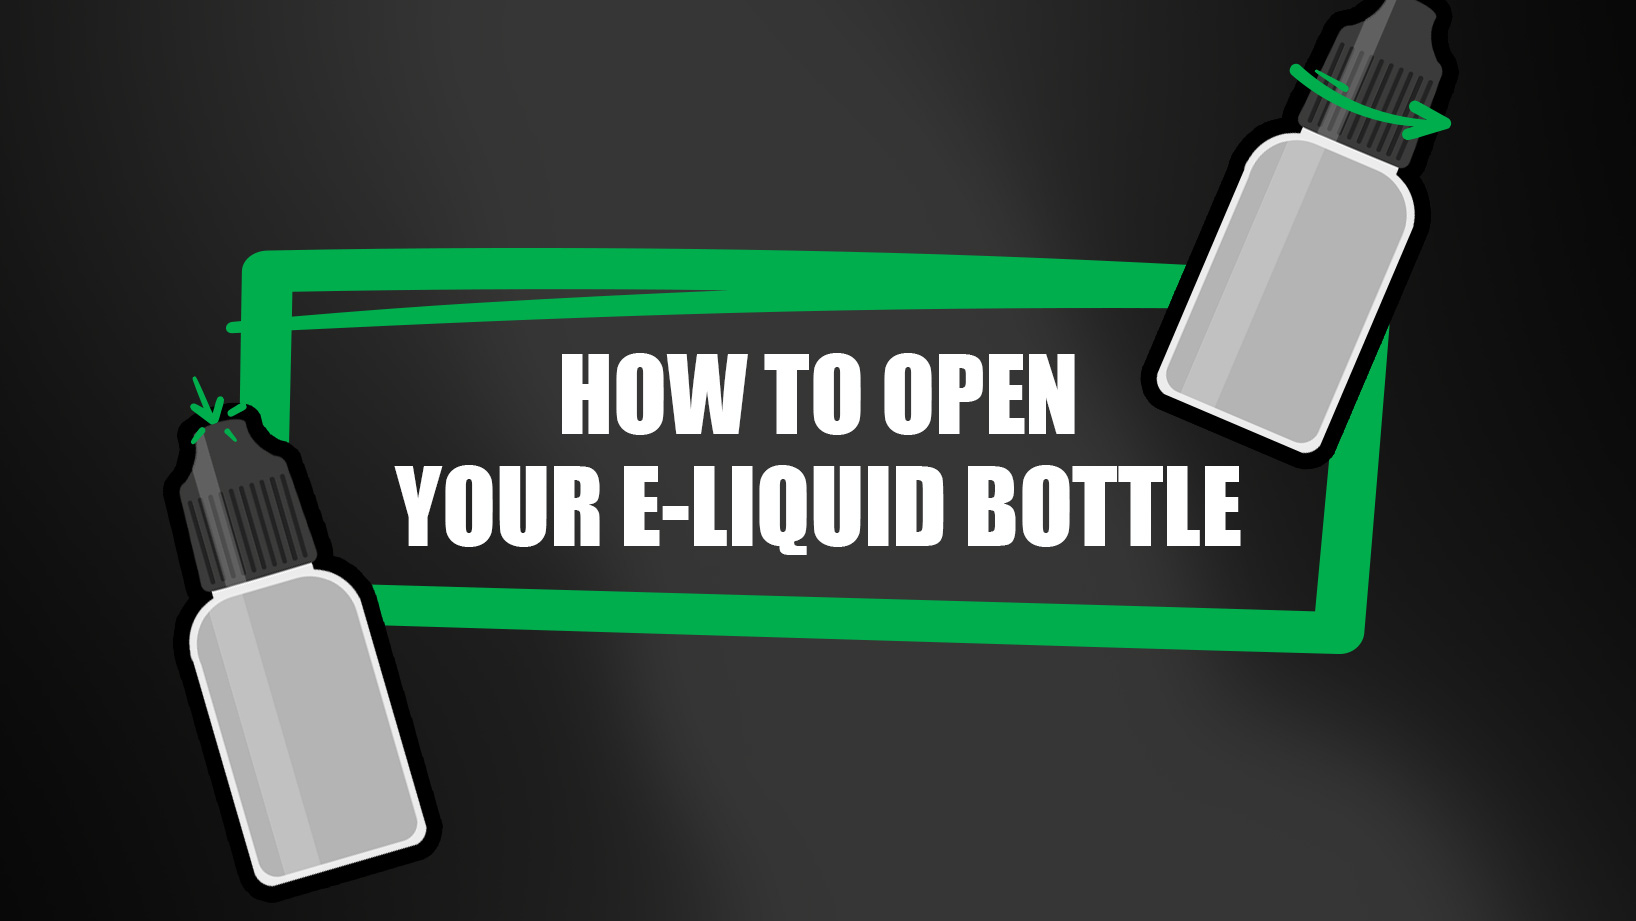 How To Open Your E-liquid Bottle.It can be tricky sometimes, so here's a guide on opening your e-liquid.